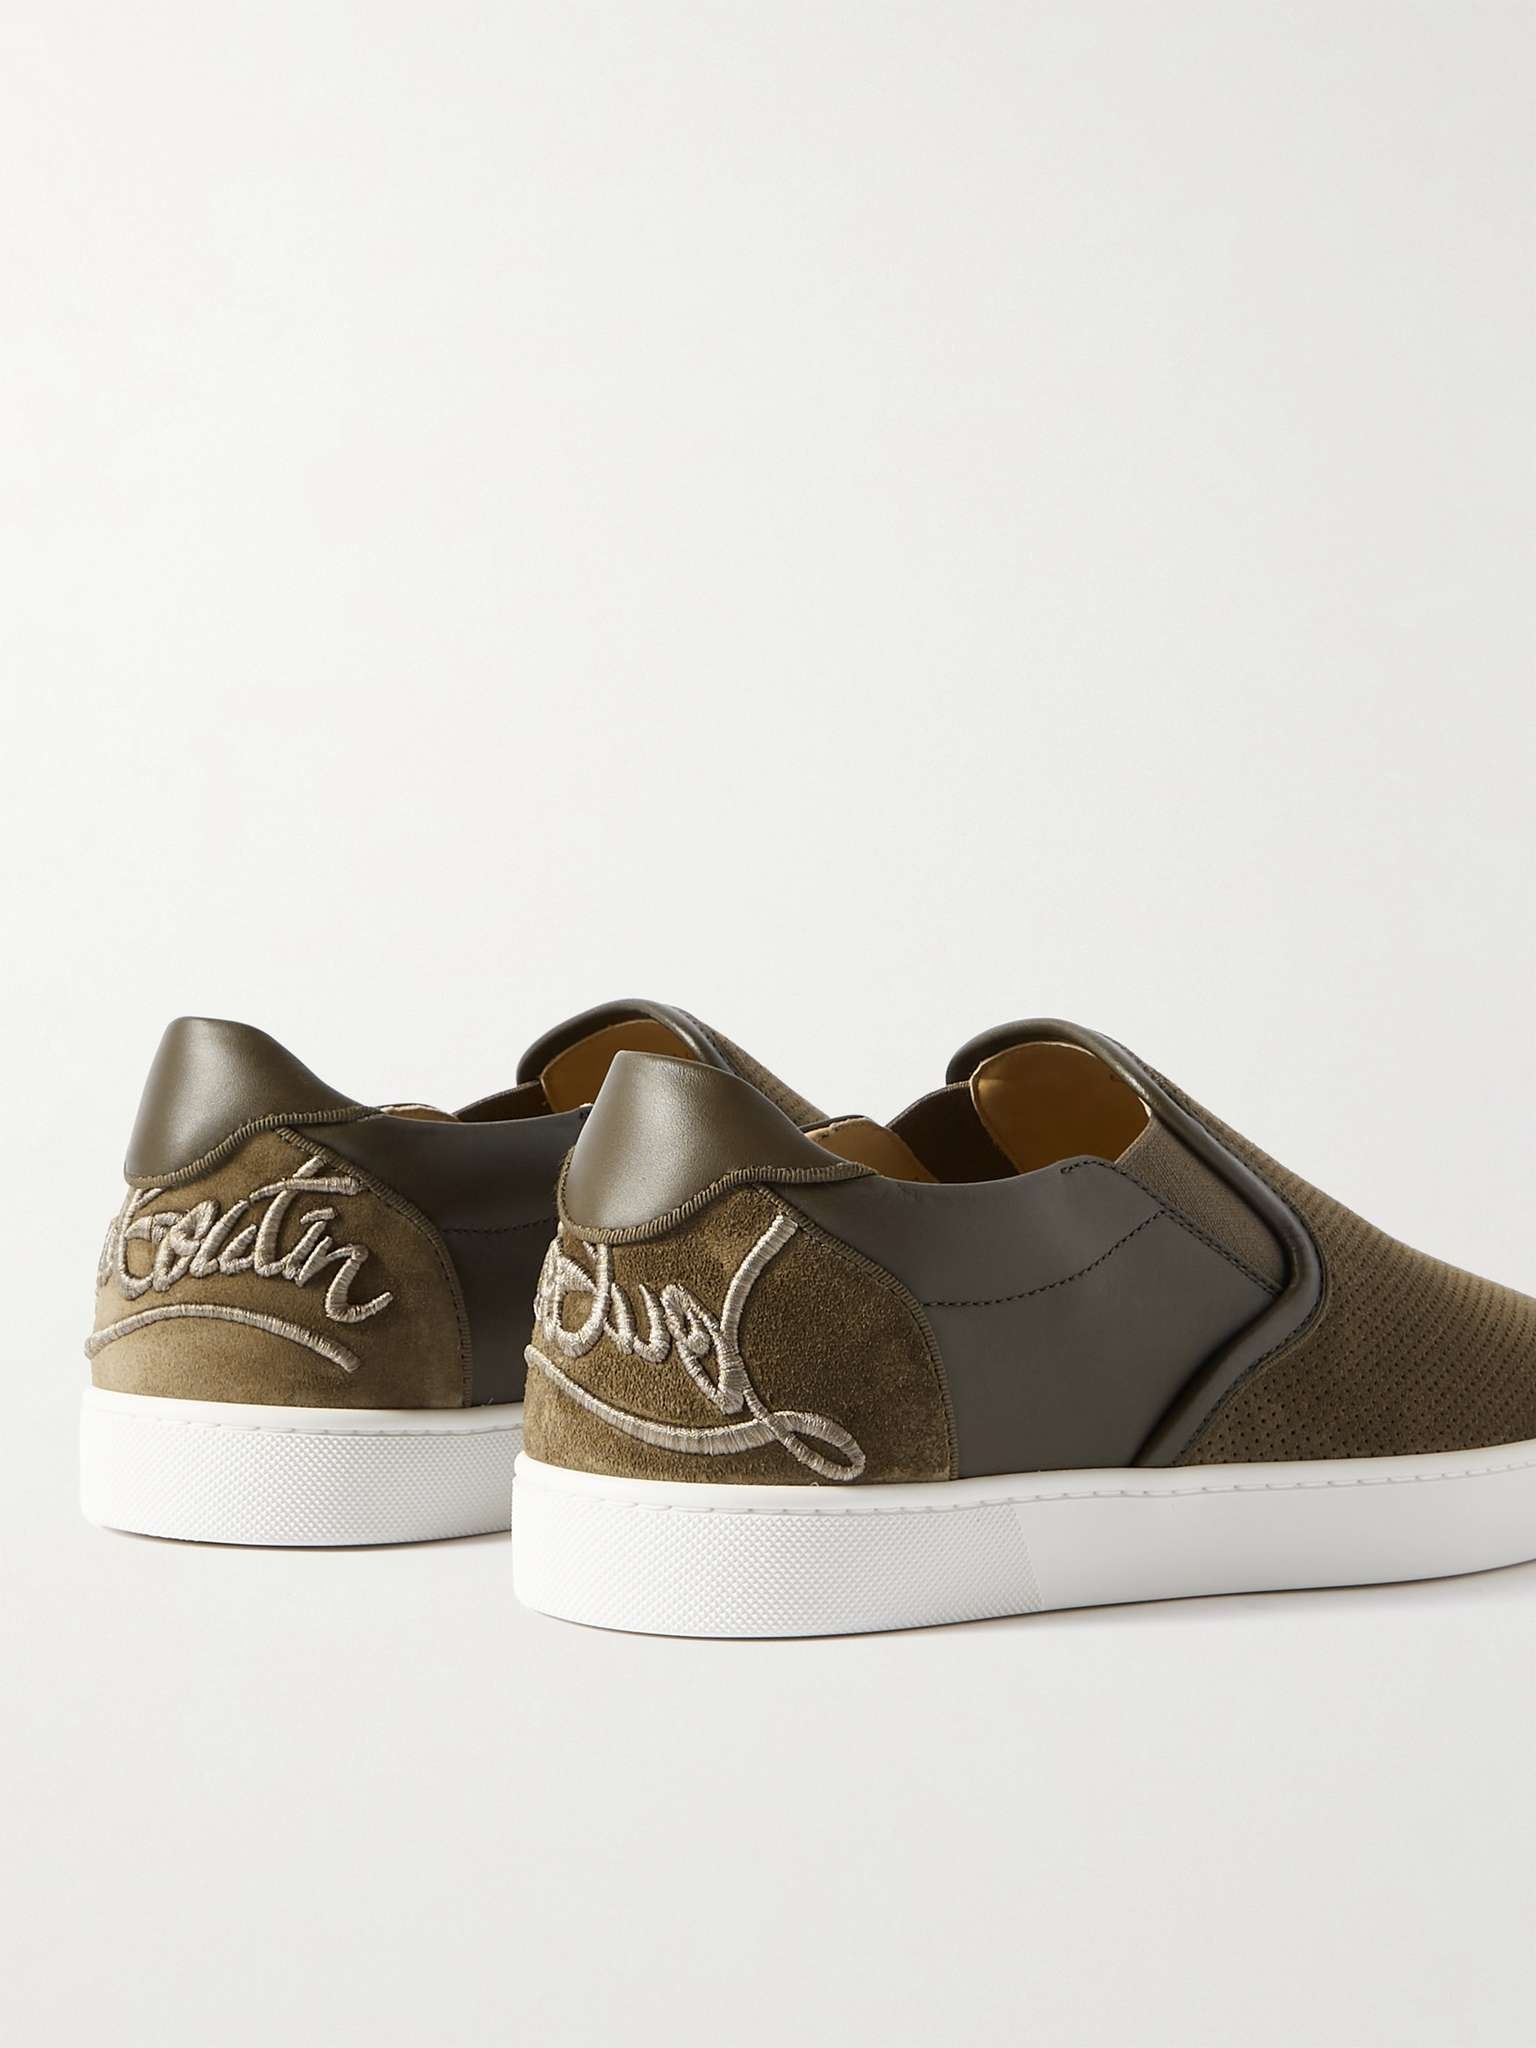 Fun Sailor Leather-Trimmed Perforated Suede Slip-On Sneakers - 5